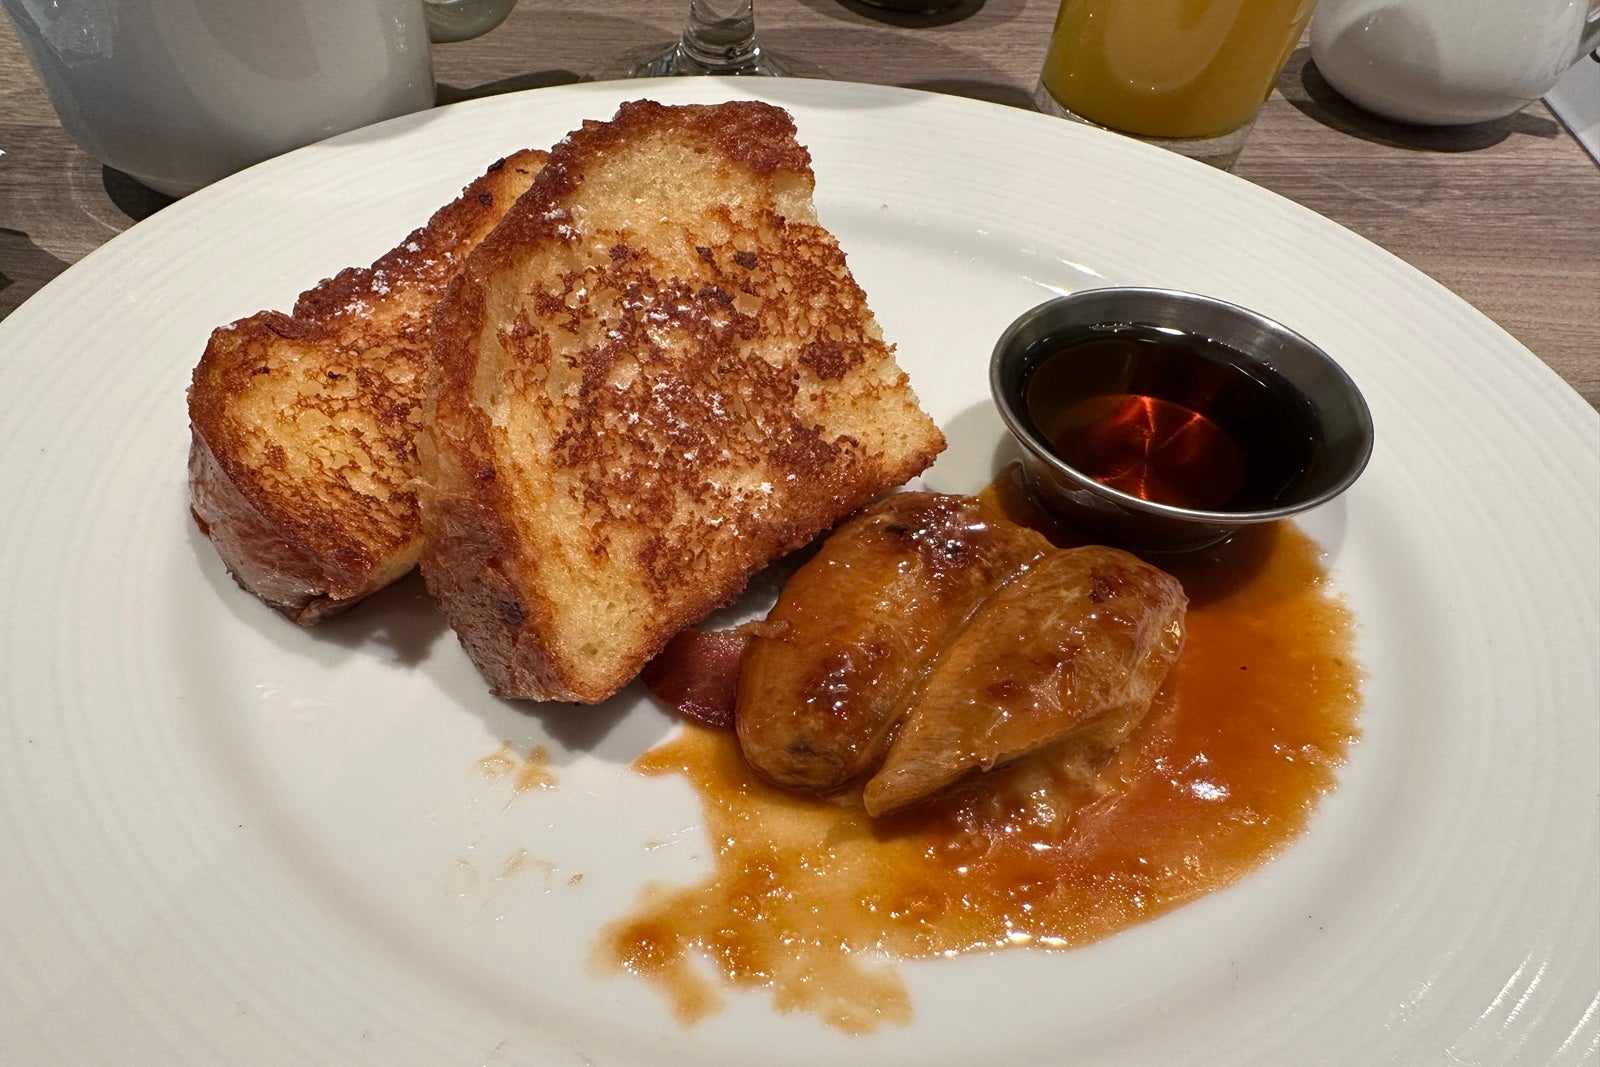 carnival cruise food pictures